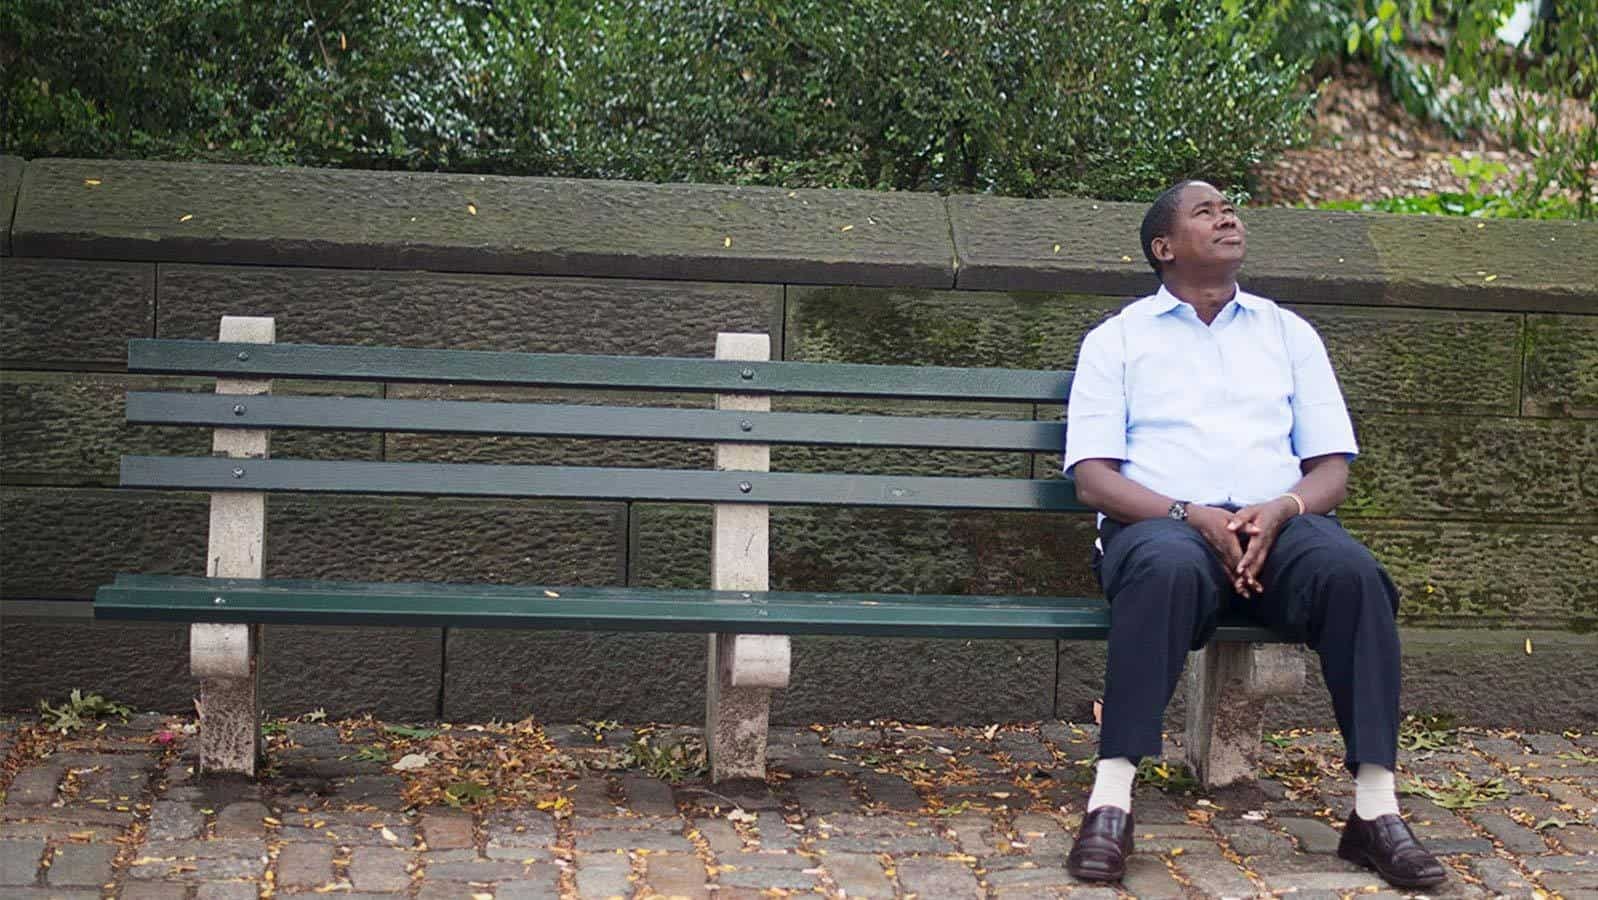 A man sitting on the bench